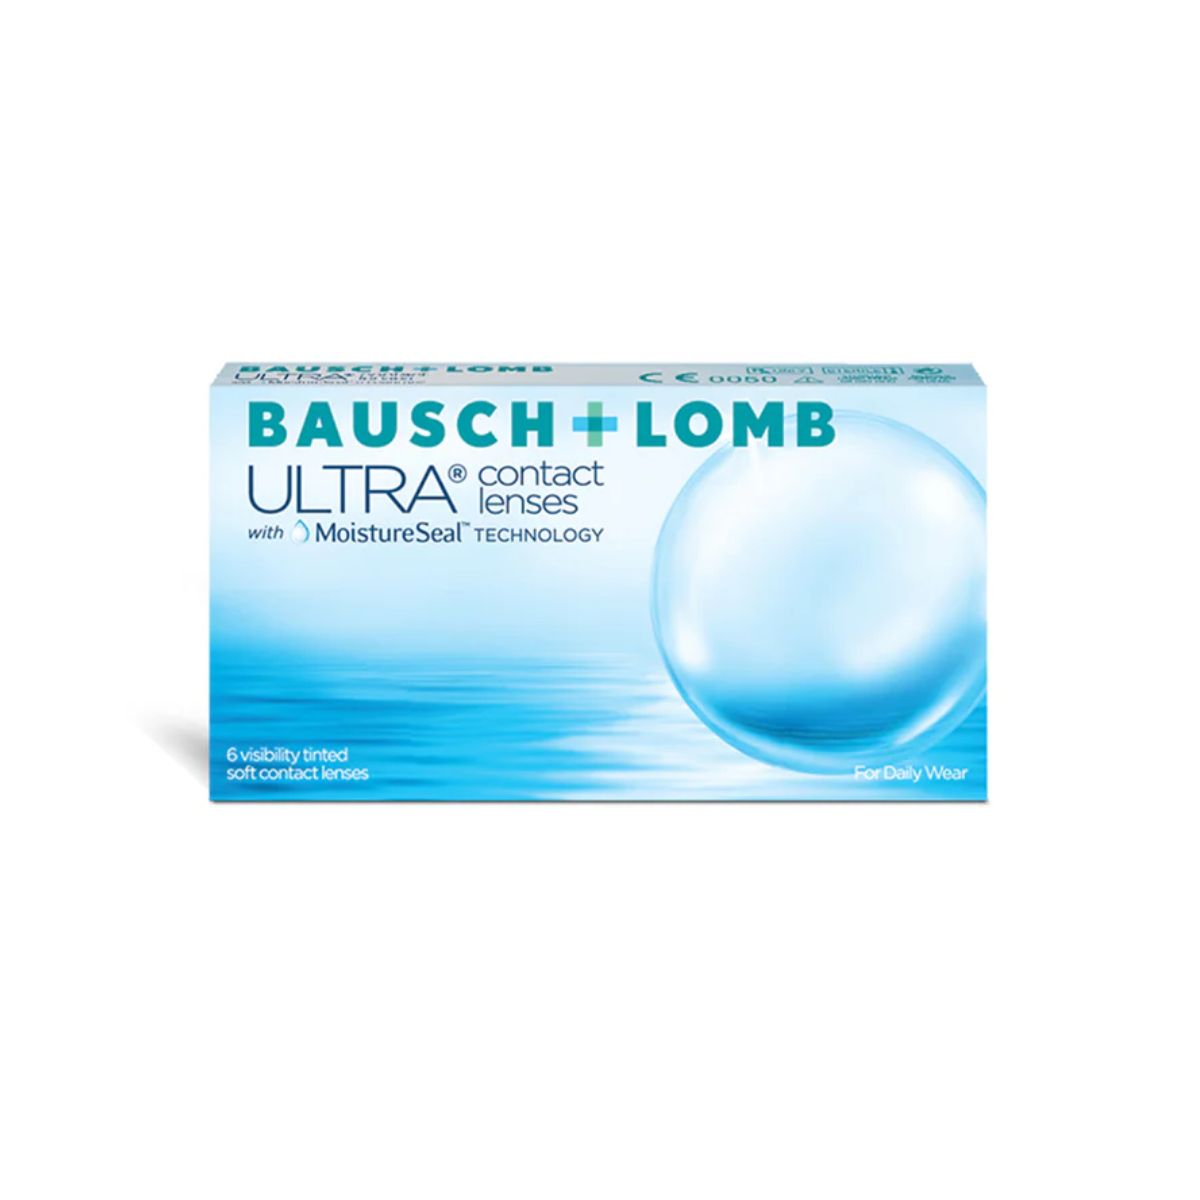 "Clarity and Comfort with Bausch + Lomb ULTRA™ Contact Lenses optorium"